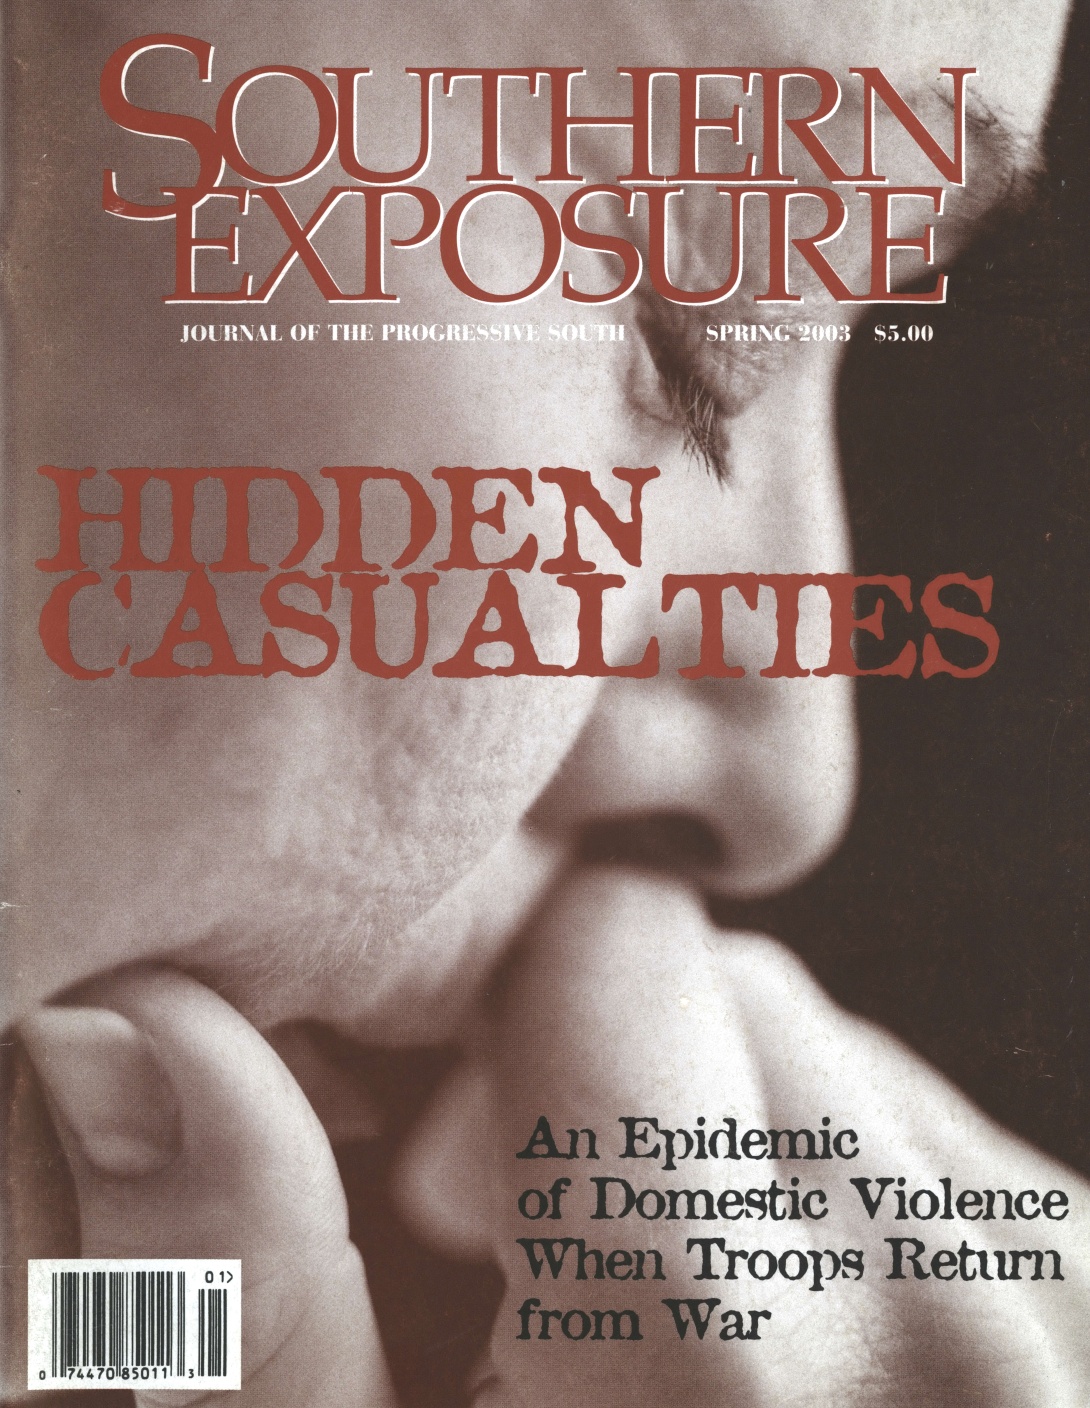 Magazine cover with closeup profile shot of woman with face in hands. Text reads "Hidden Casualties: An Epidemic of Domestic Violence When Troops Return from War"